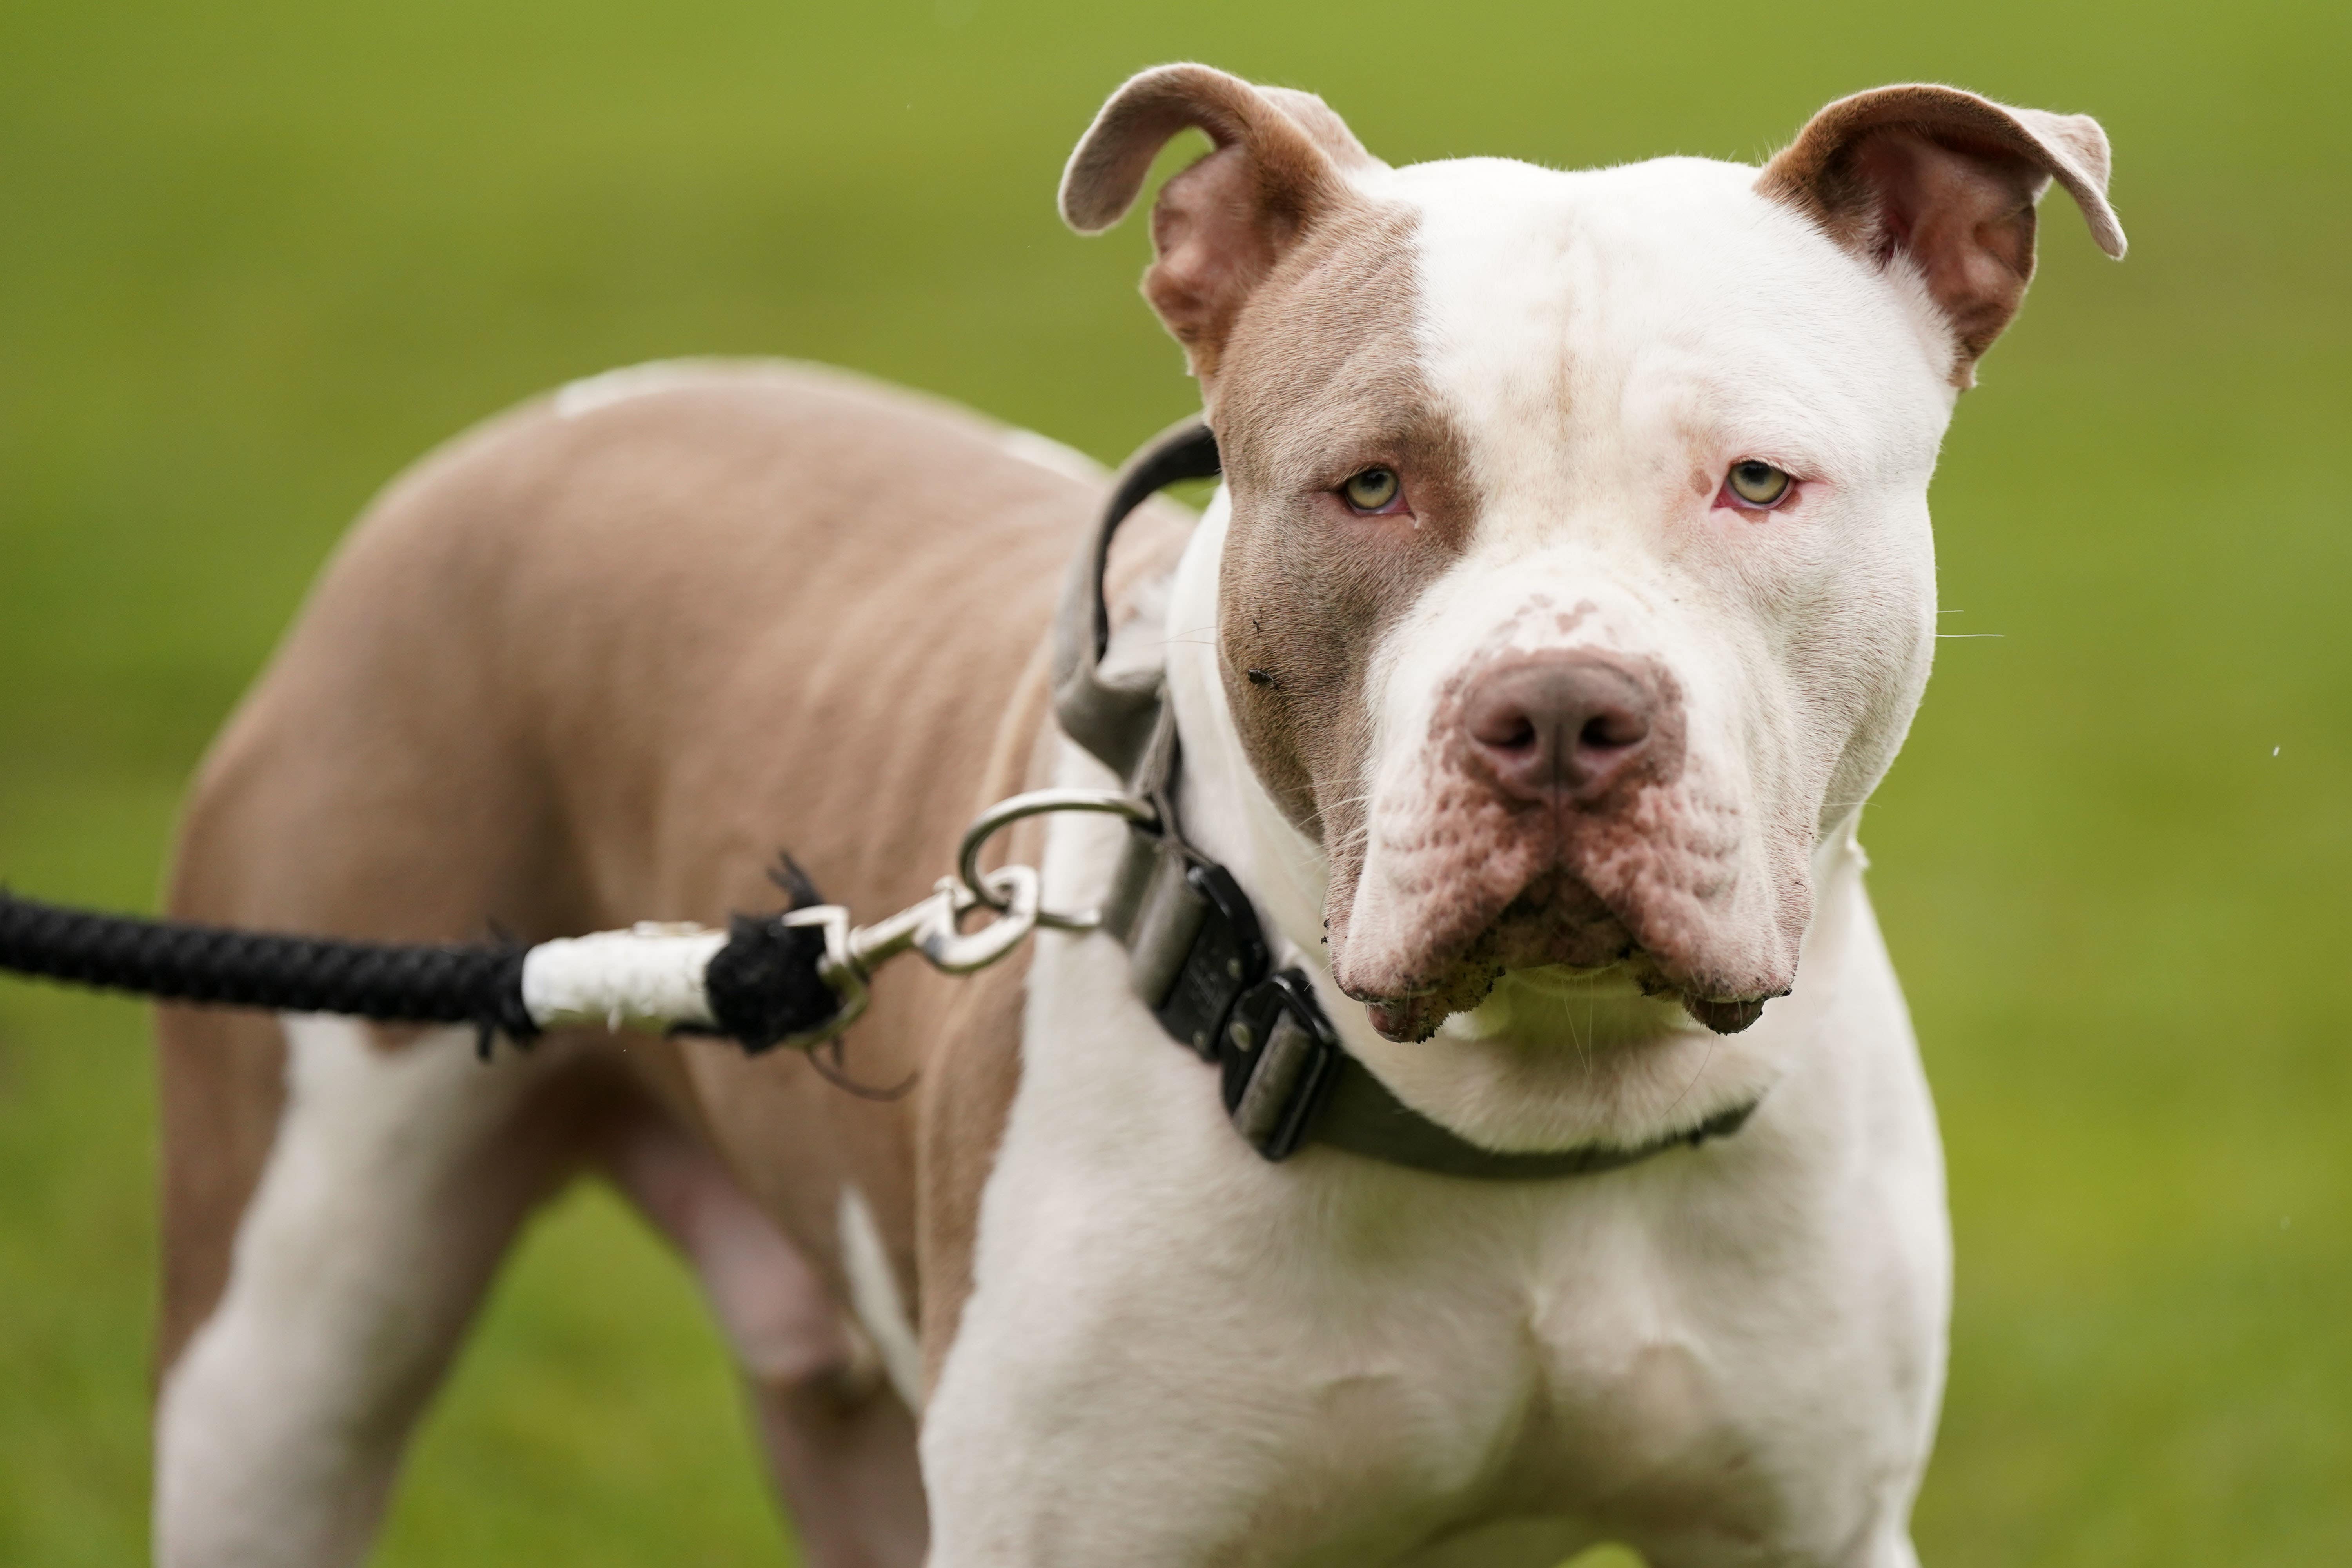 XL bully dogs will be banned from February following a series of attacks